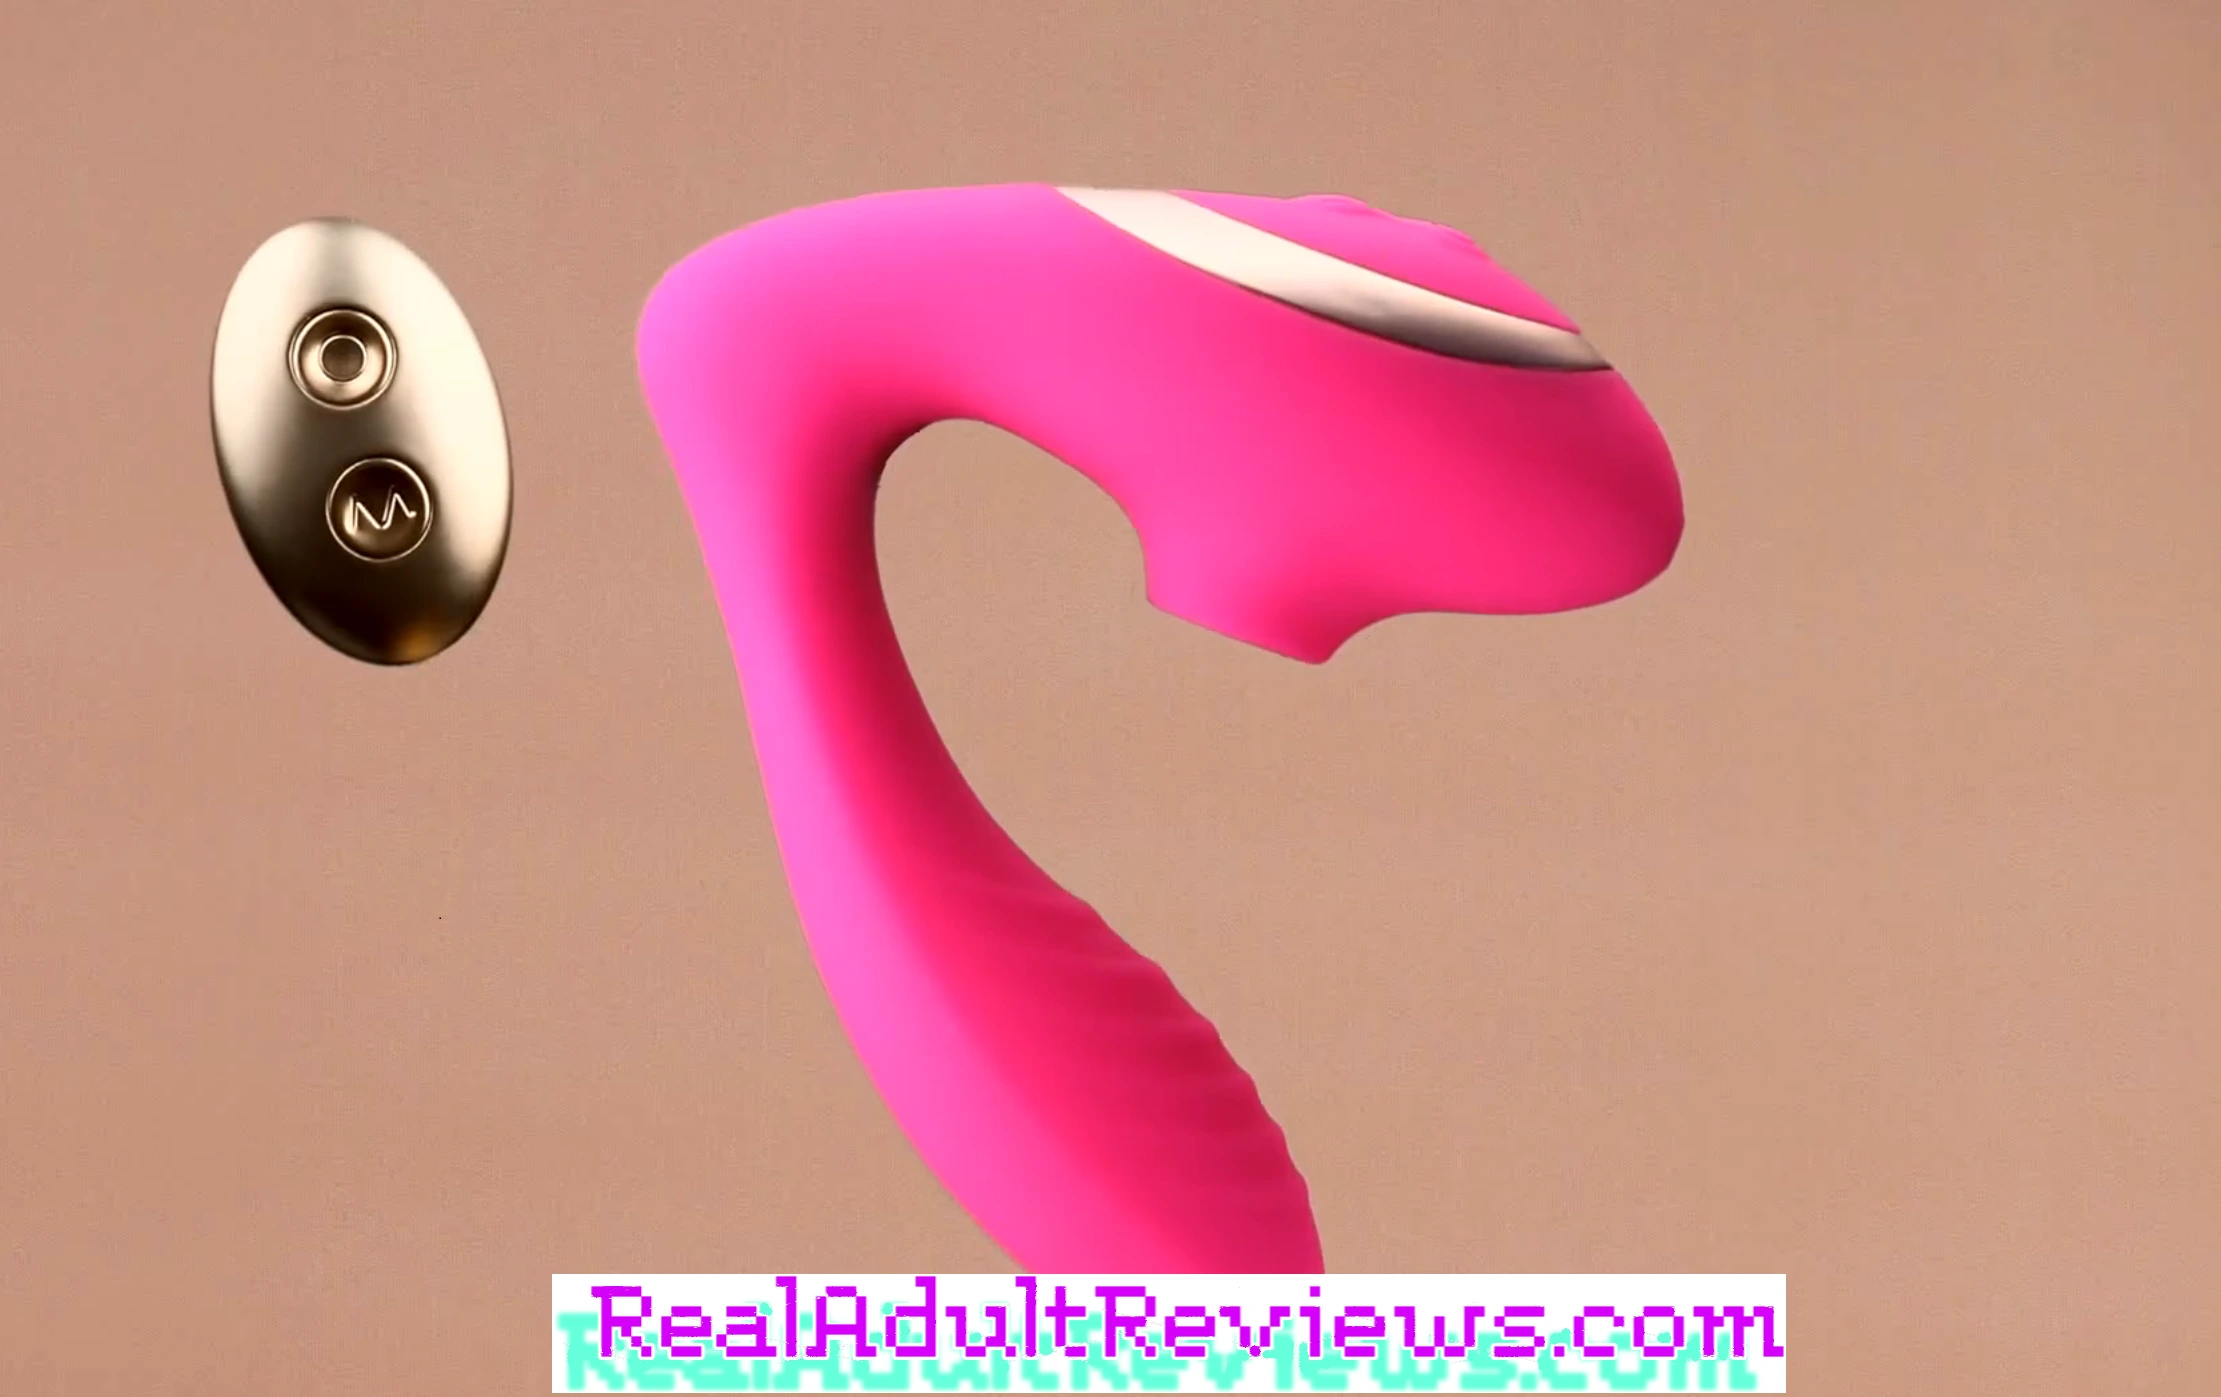 Tracy’s Dog Og Pro 2 Review: Can Remote Control G-Spot and Clitoris Stimulator Surprise You?